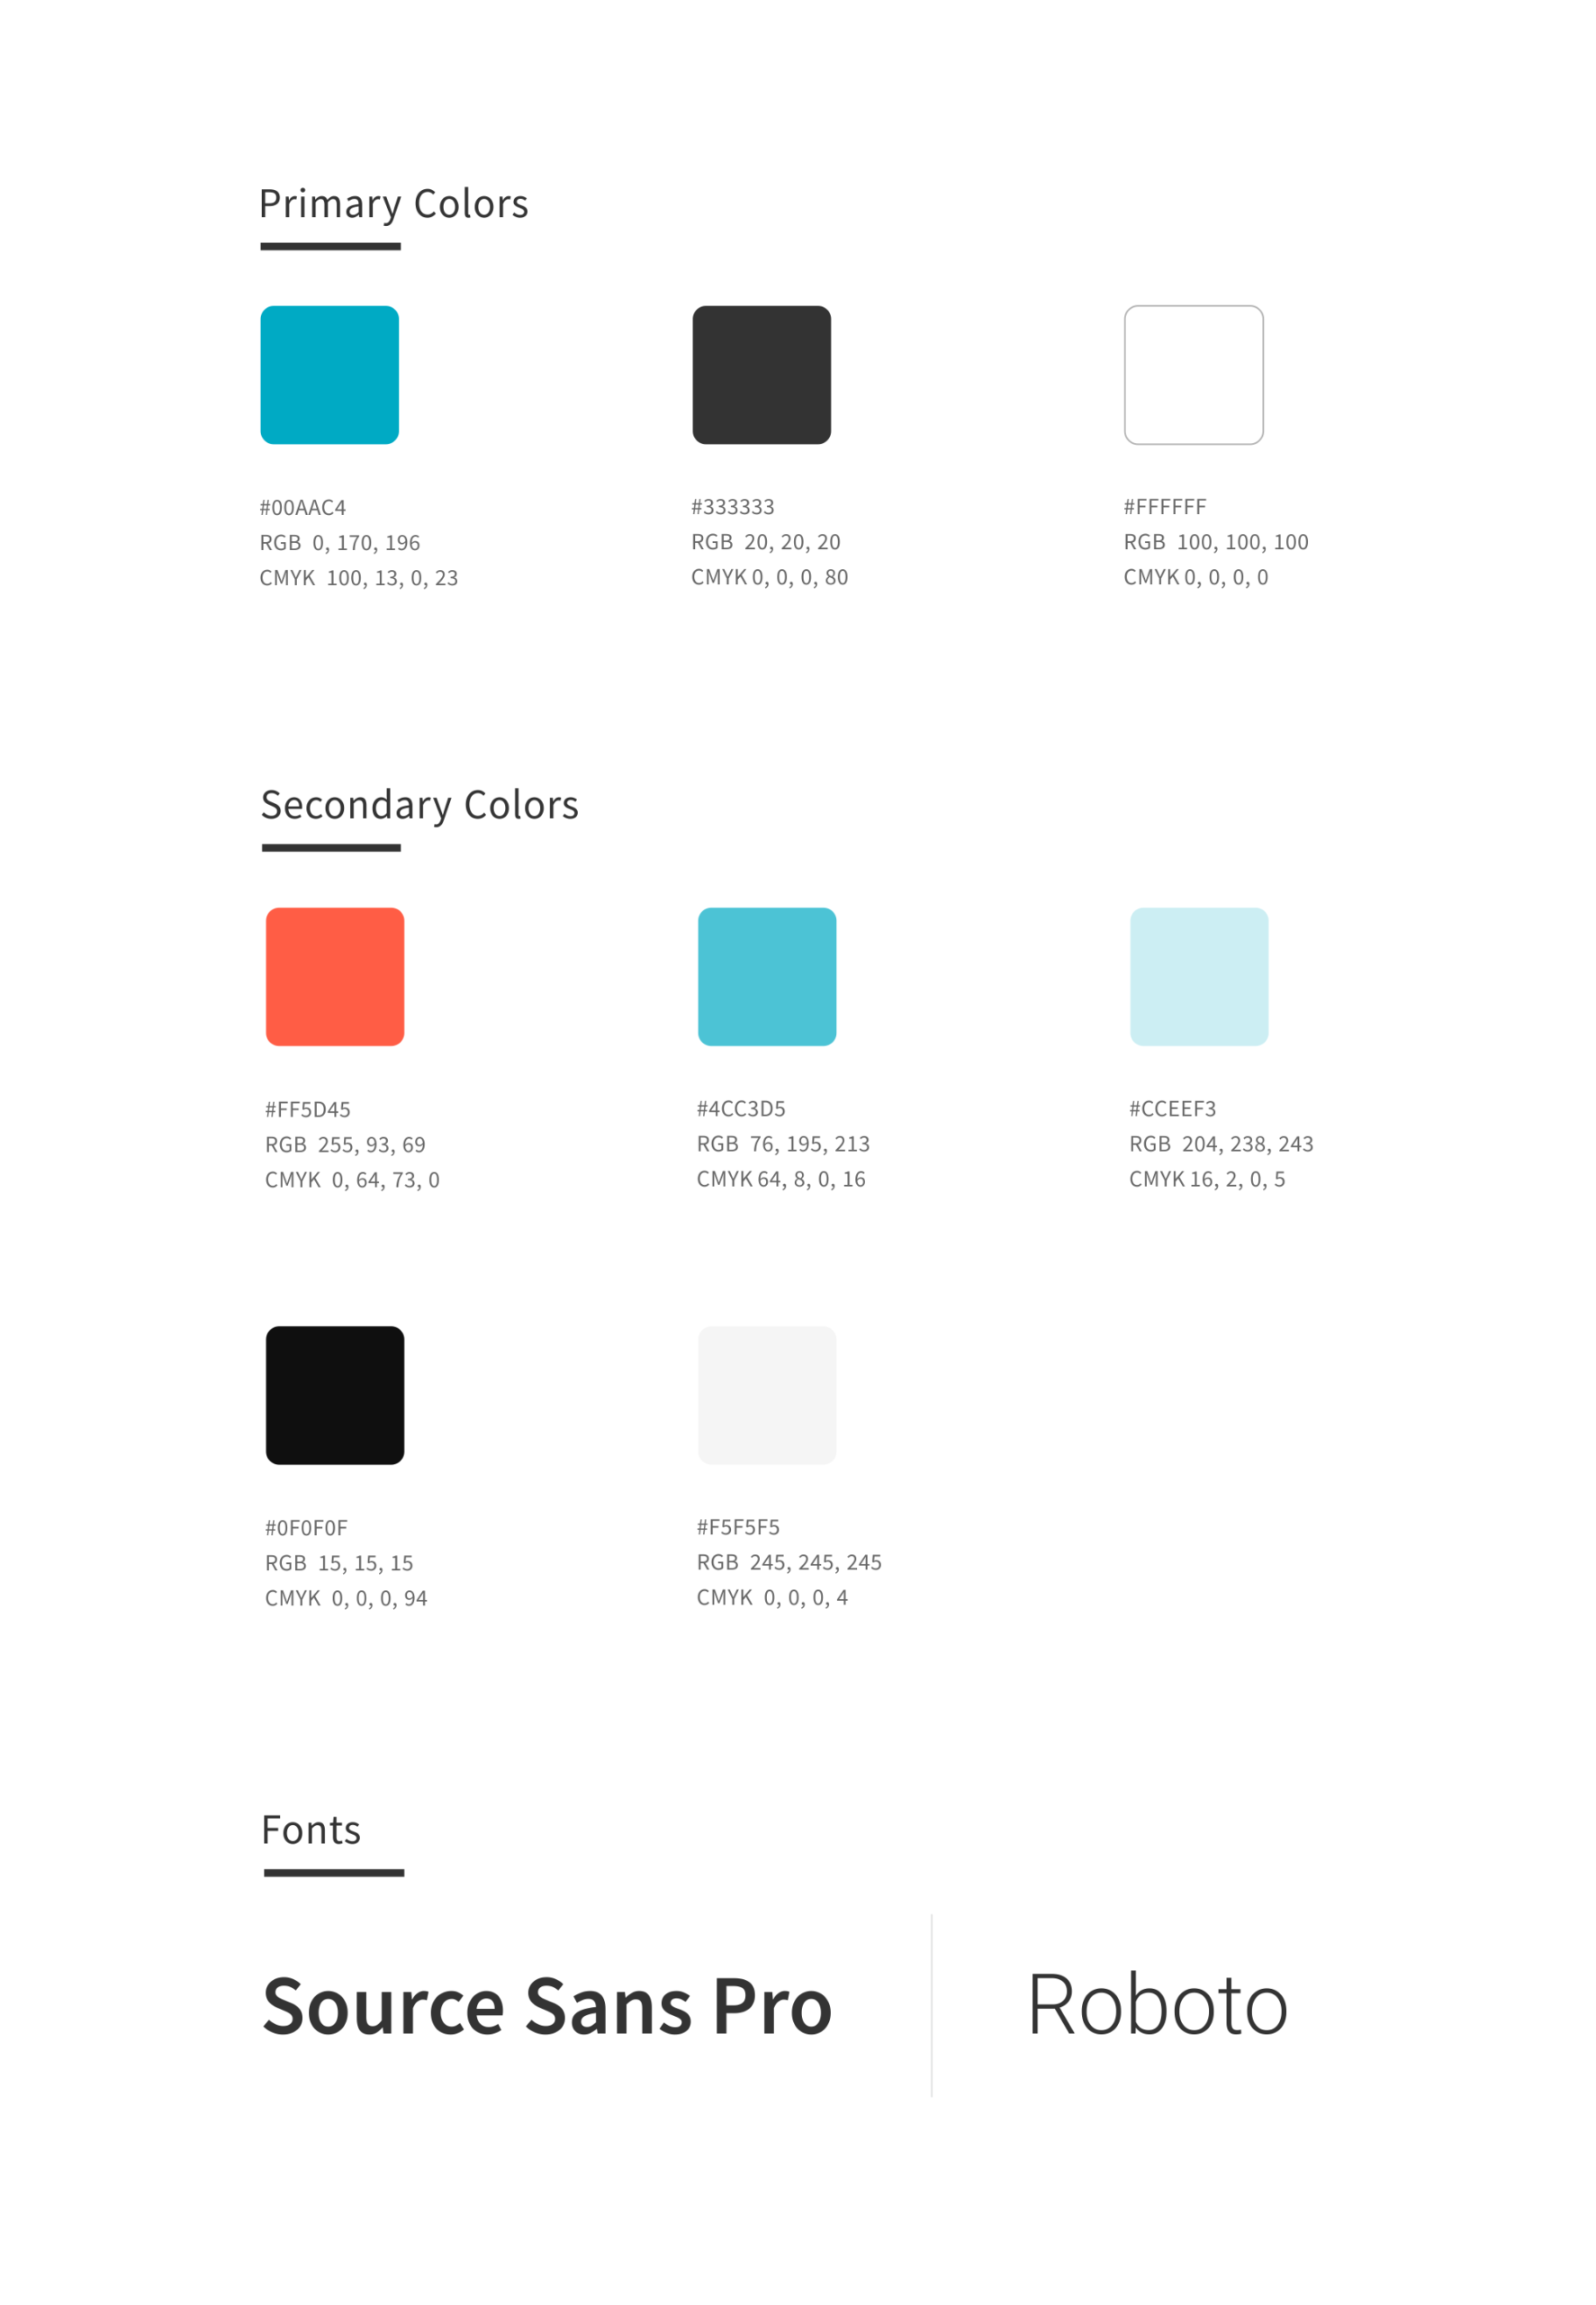 CorporateDesign24 - Style guide. Farben und Fonts.